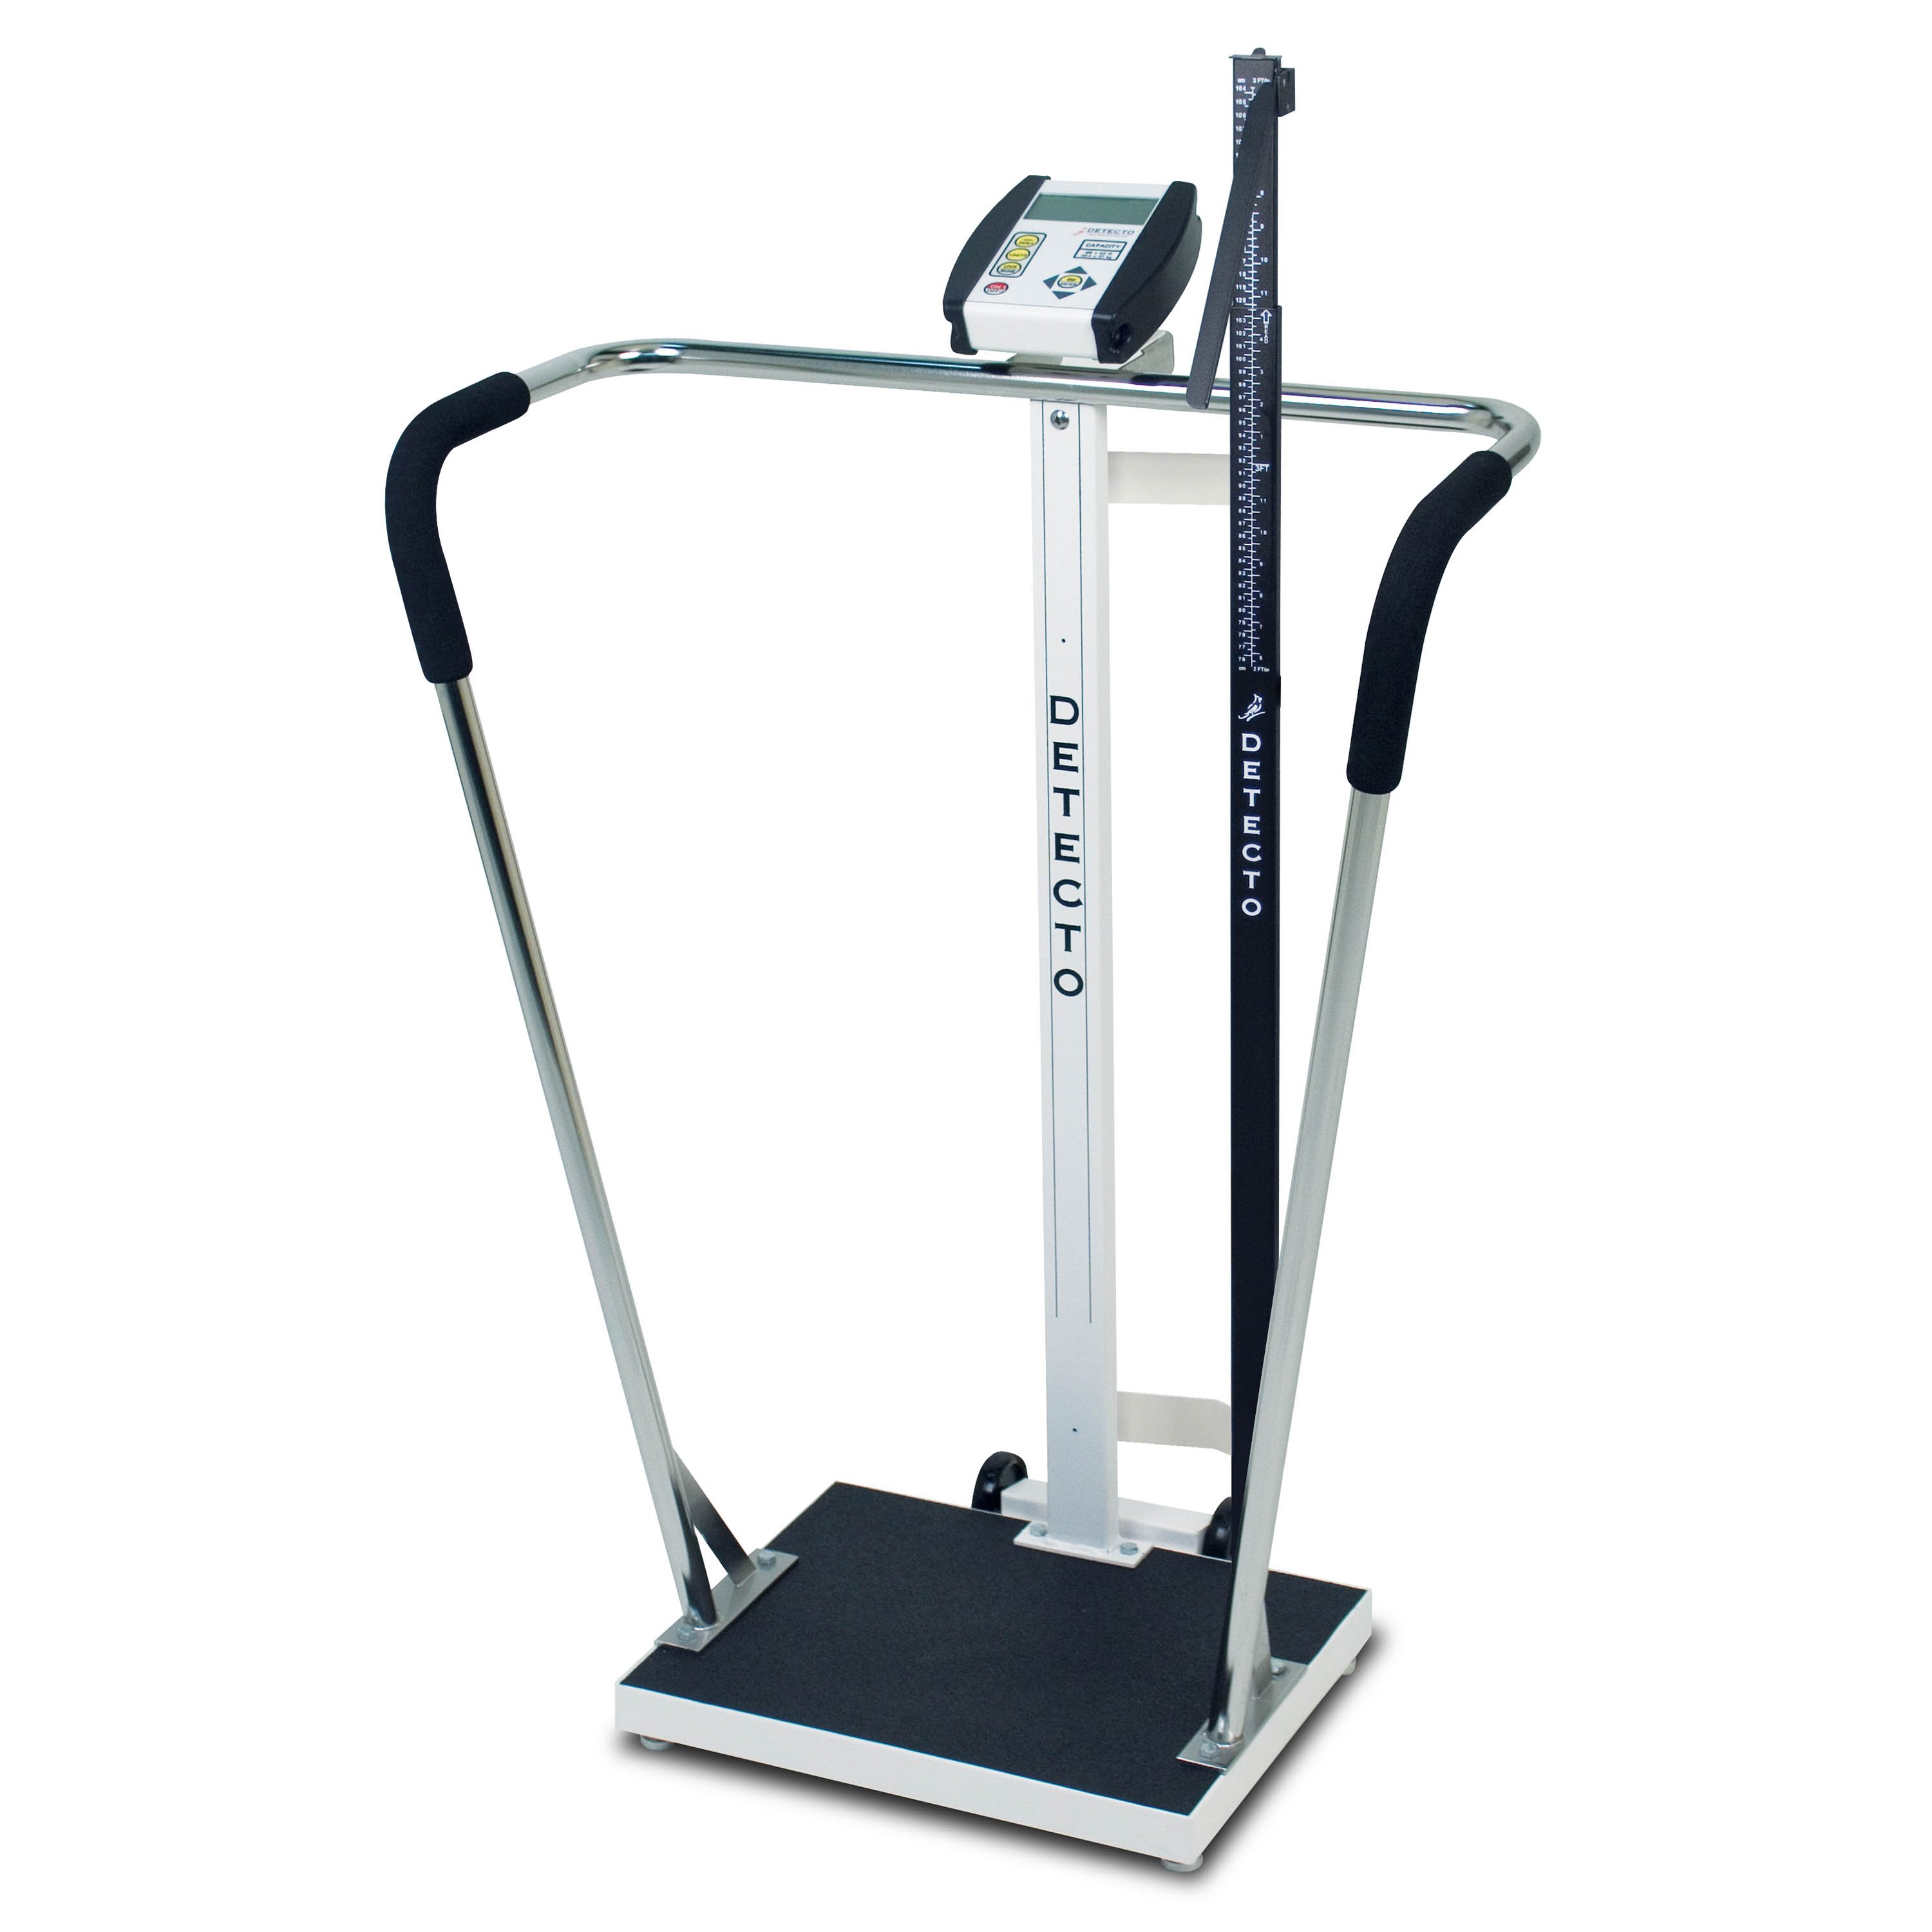 Digital Scale - SlimPRO Talking Bariatric Scale by Detecto